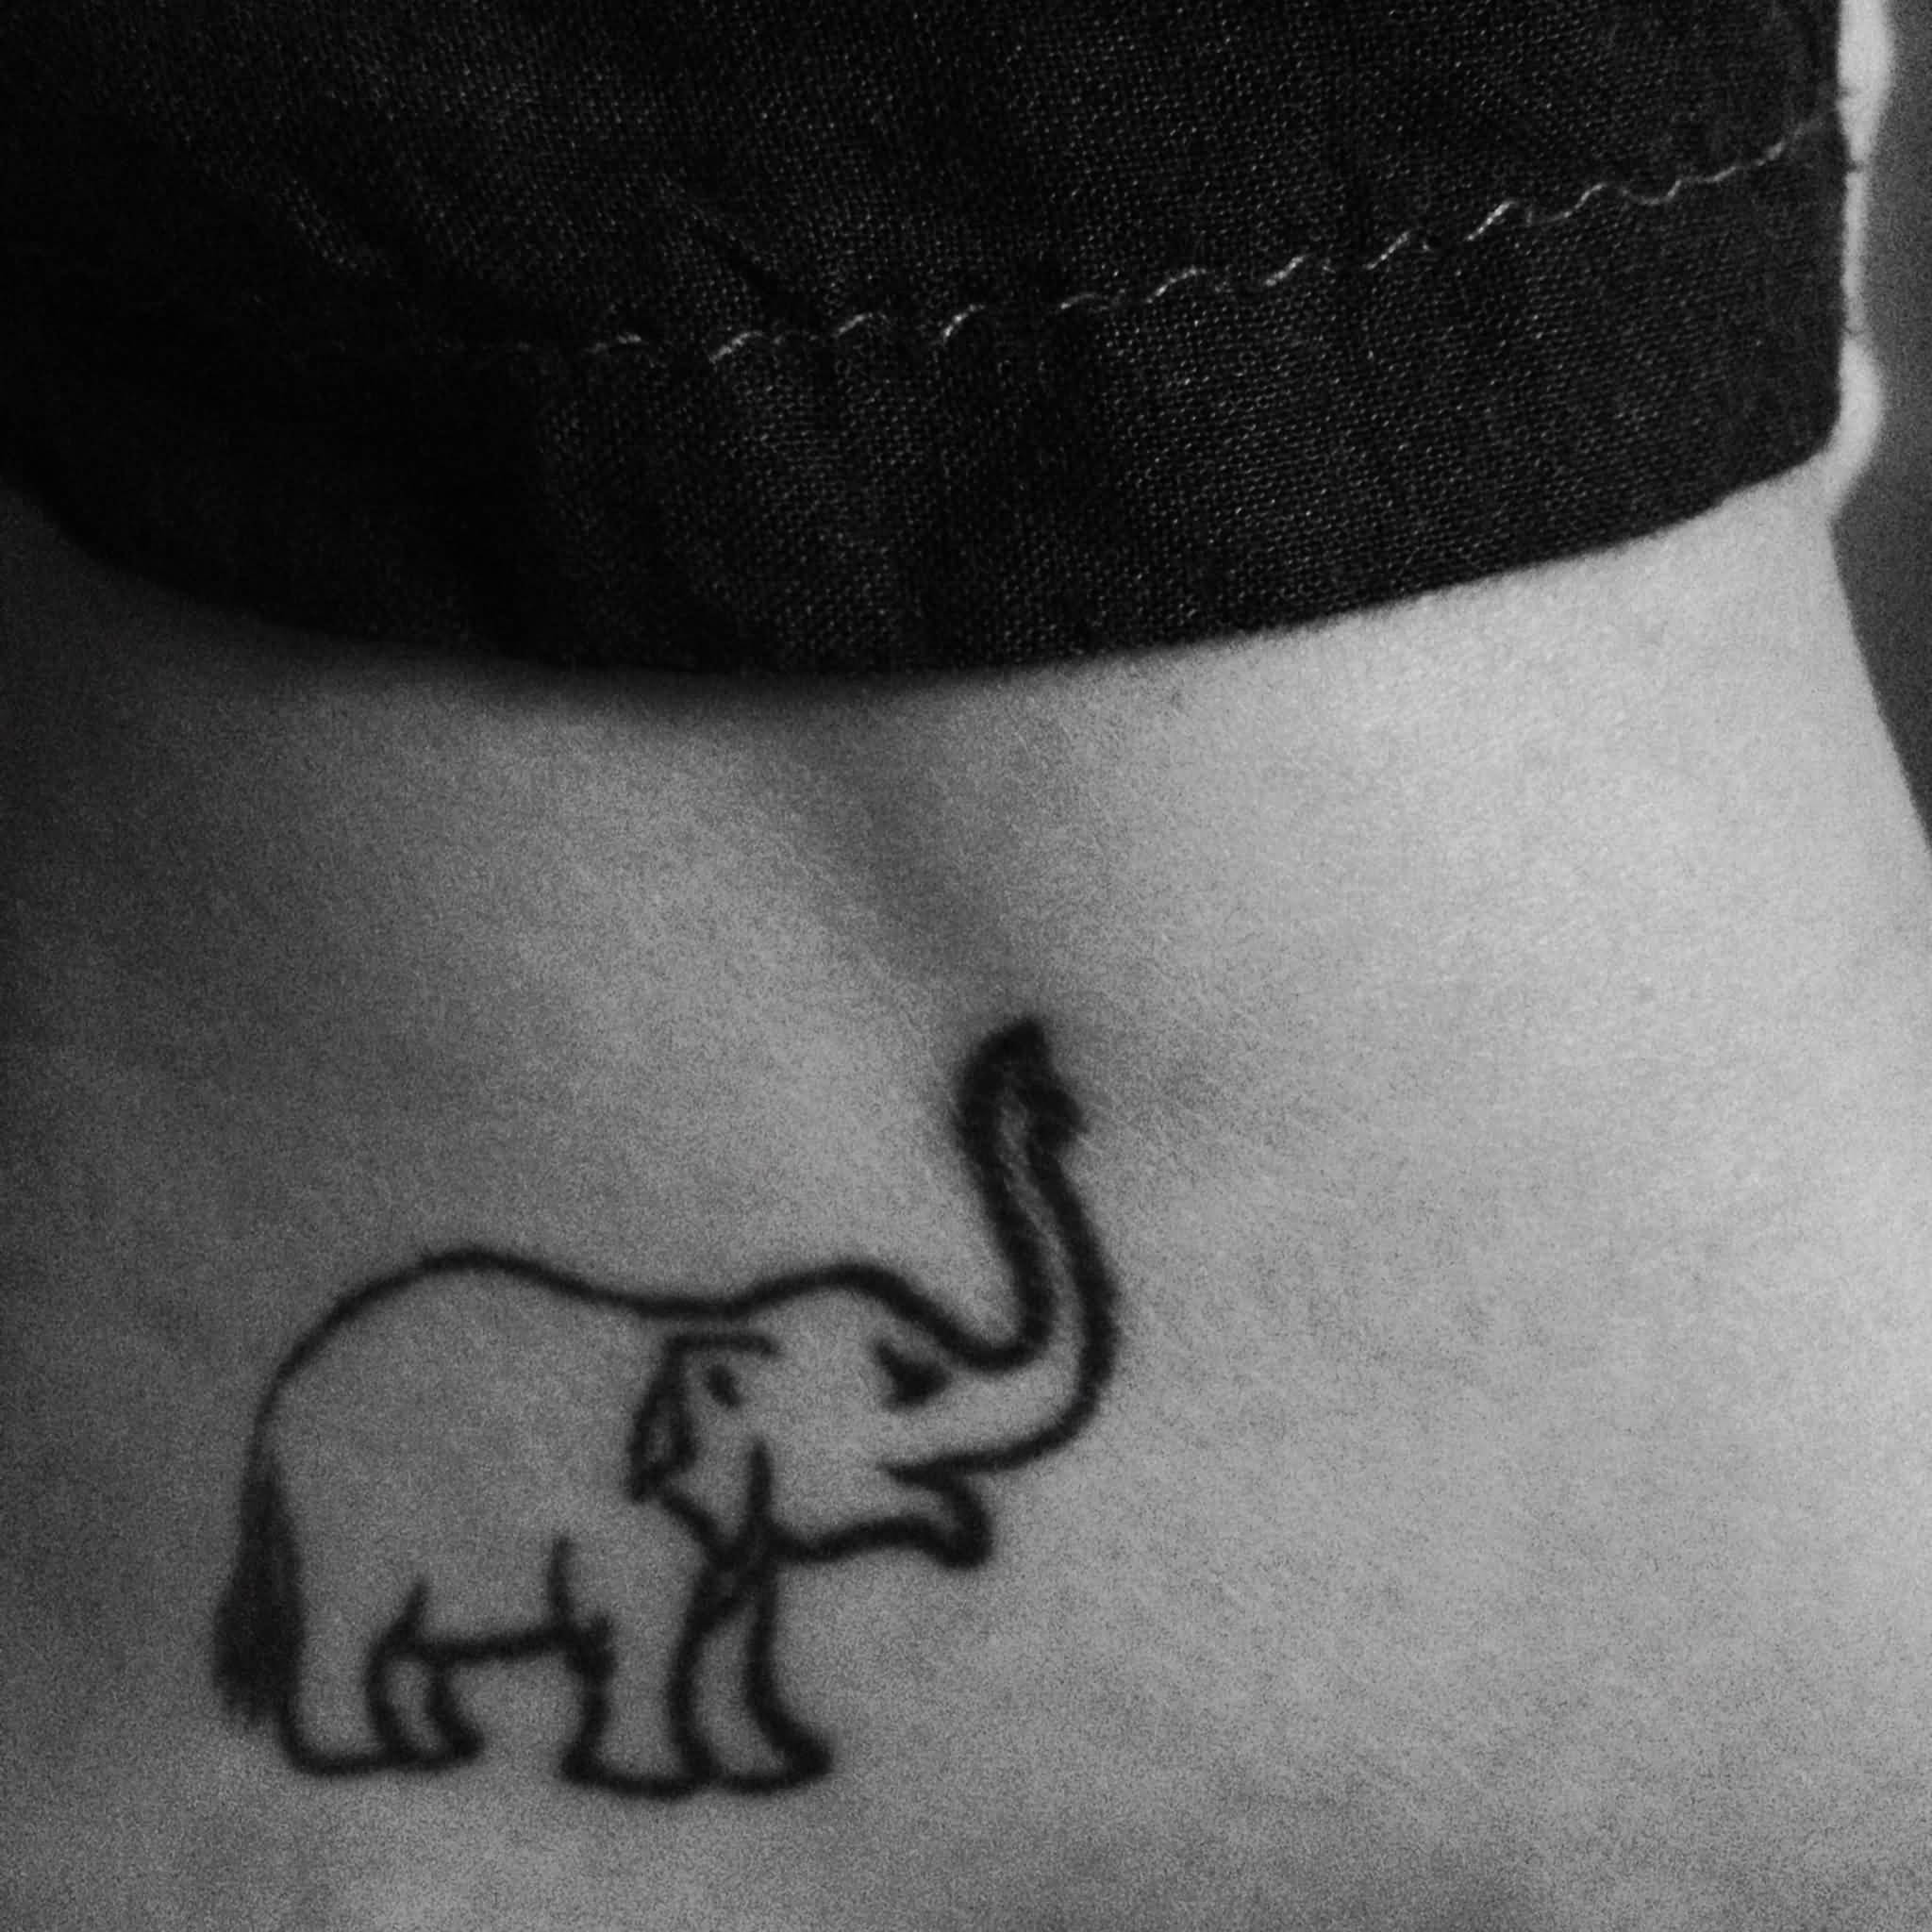 Black Outline Baby Elephant Tattoo Design For Ankle